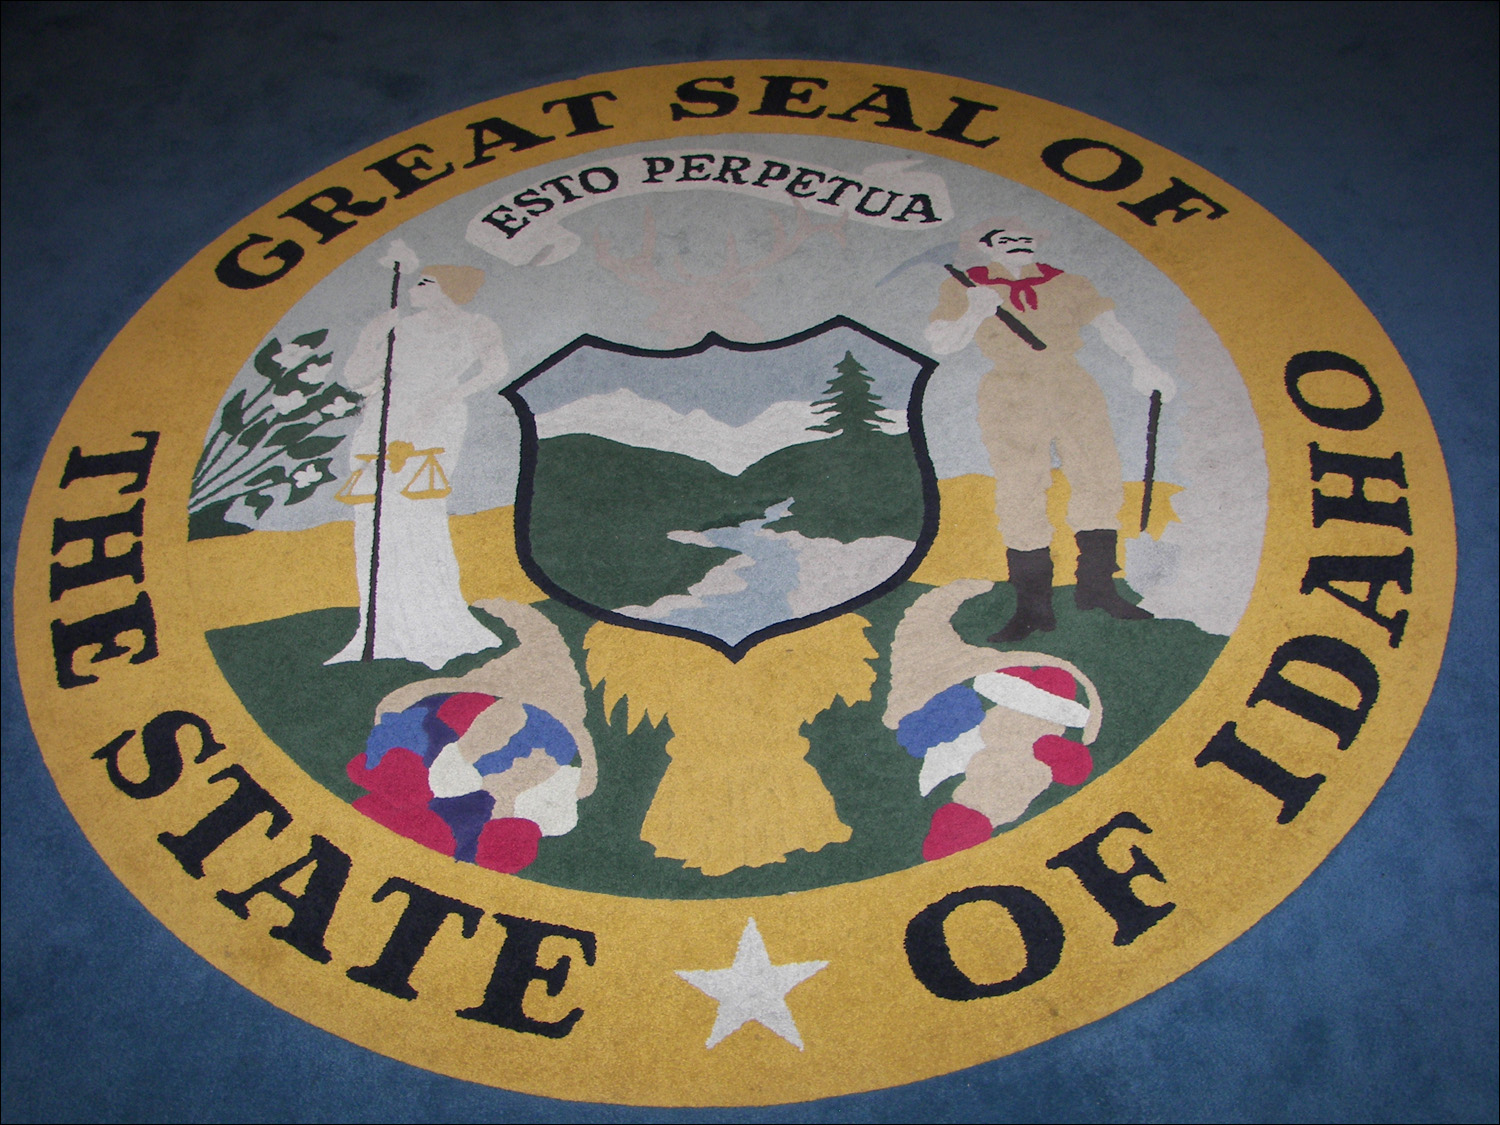 State seal